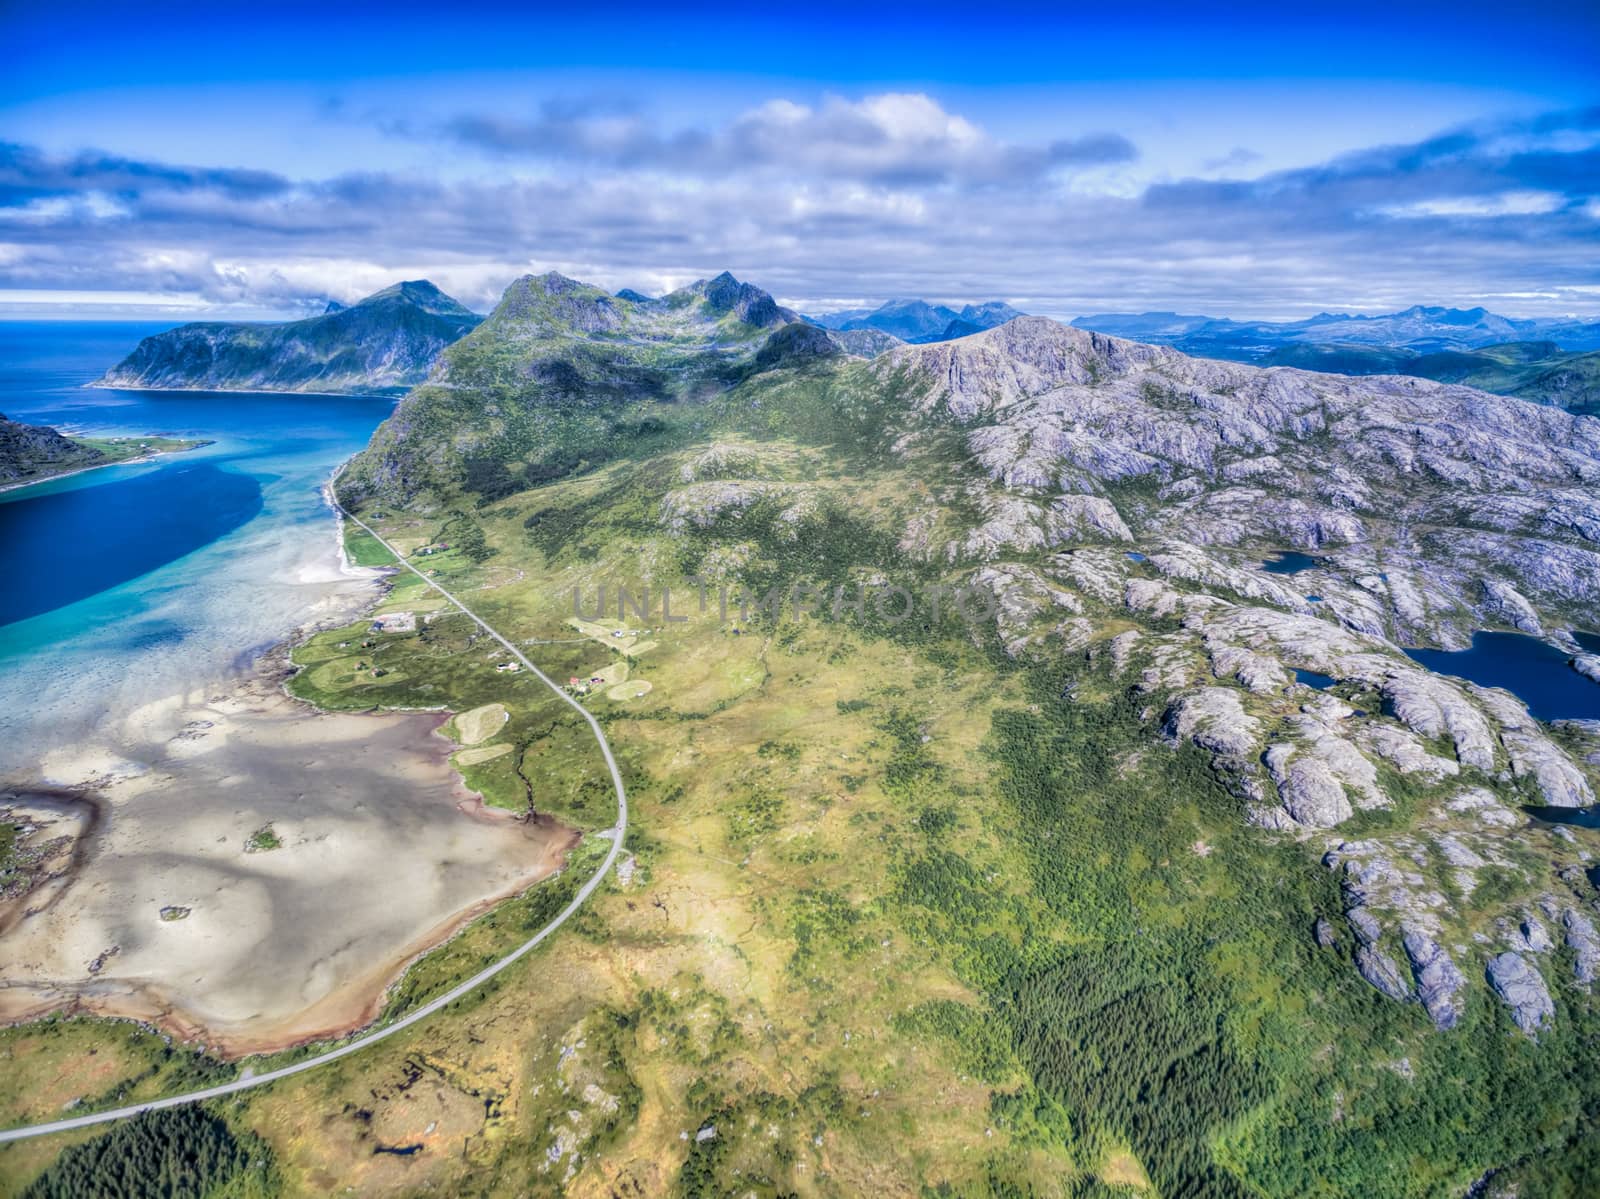 Aerial view of Lofoten islands in Norway, famous for its natural beauty